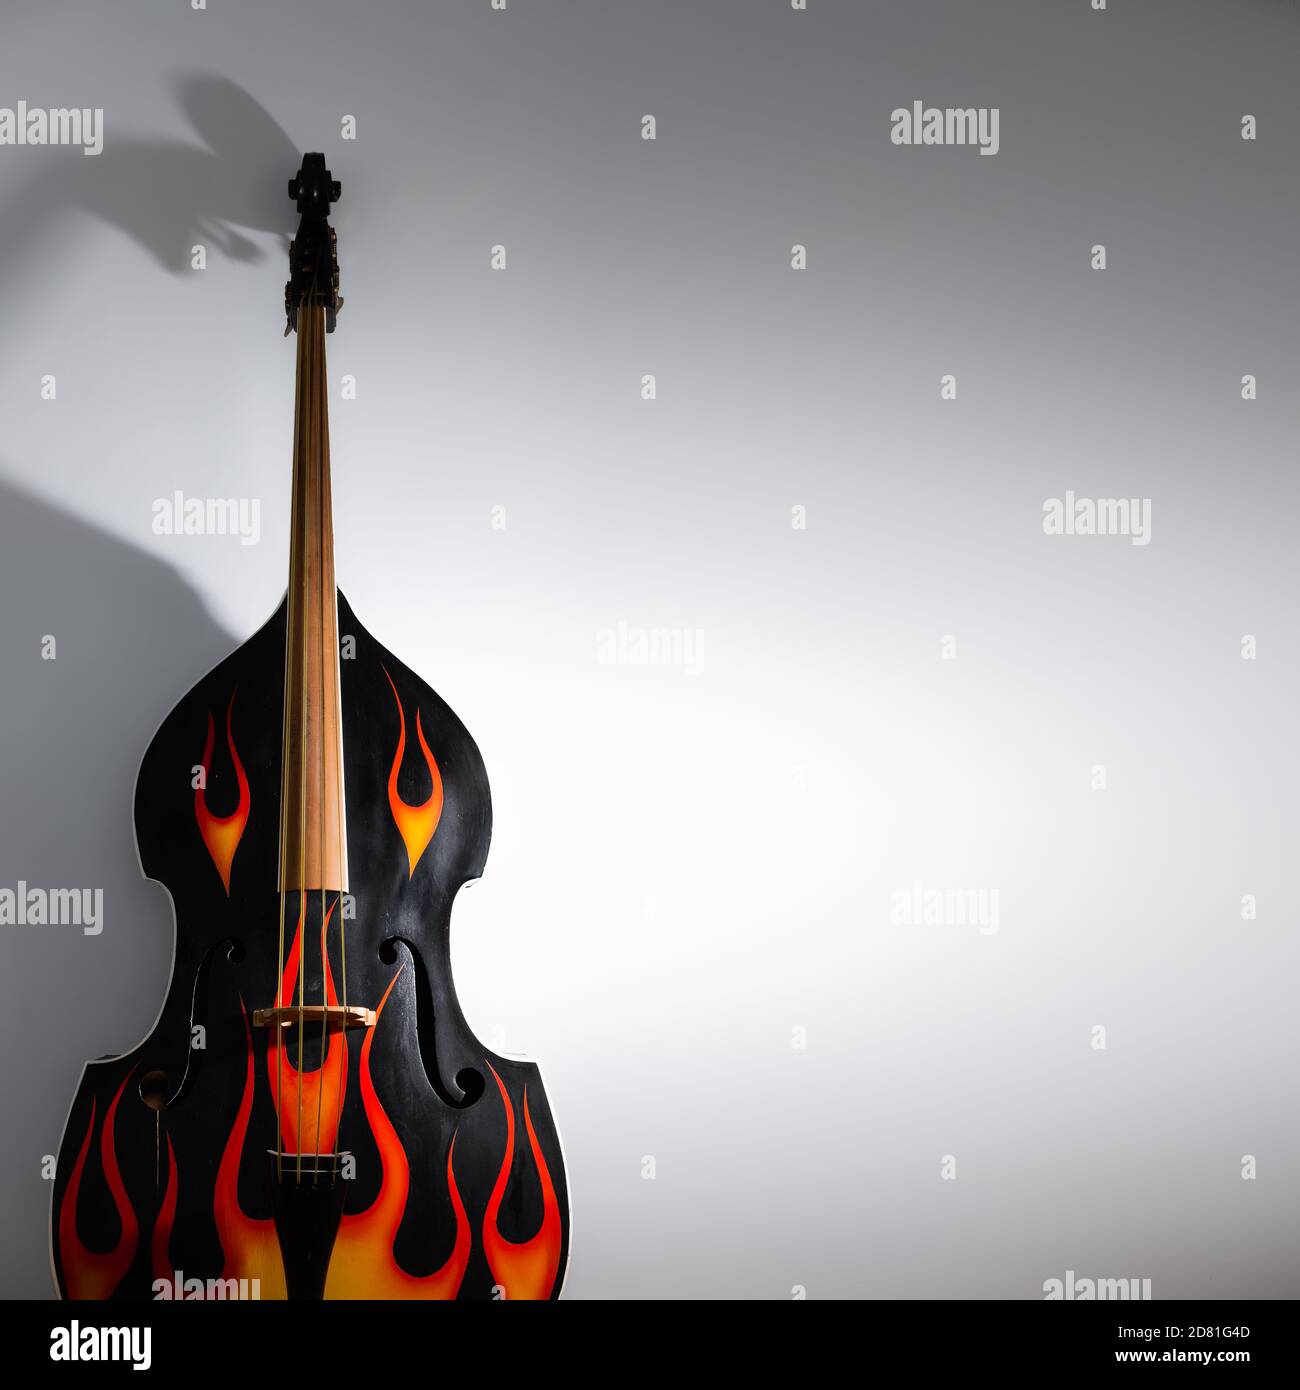 Acoustic Double Bass With Flames Decals Close Up View Rock N Roll Rockabilly Musical Instrument In Studio Background Shot In Low Key Stock Photo Alamy